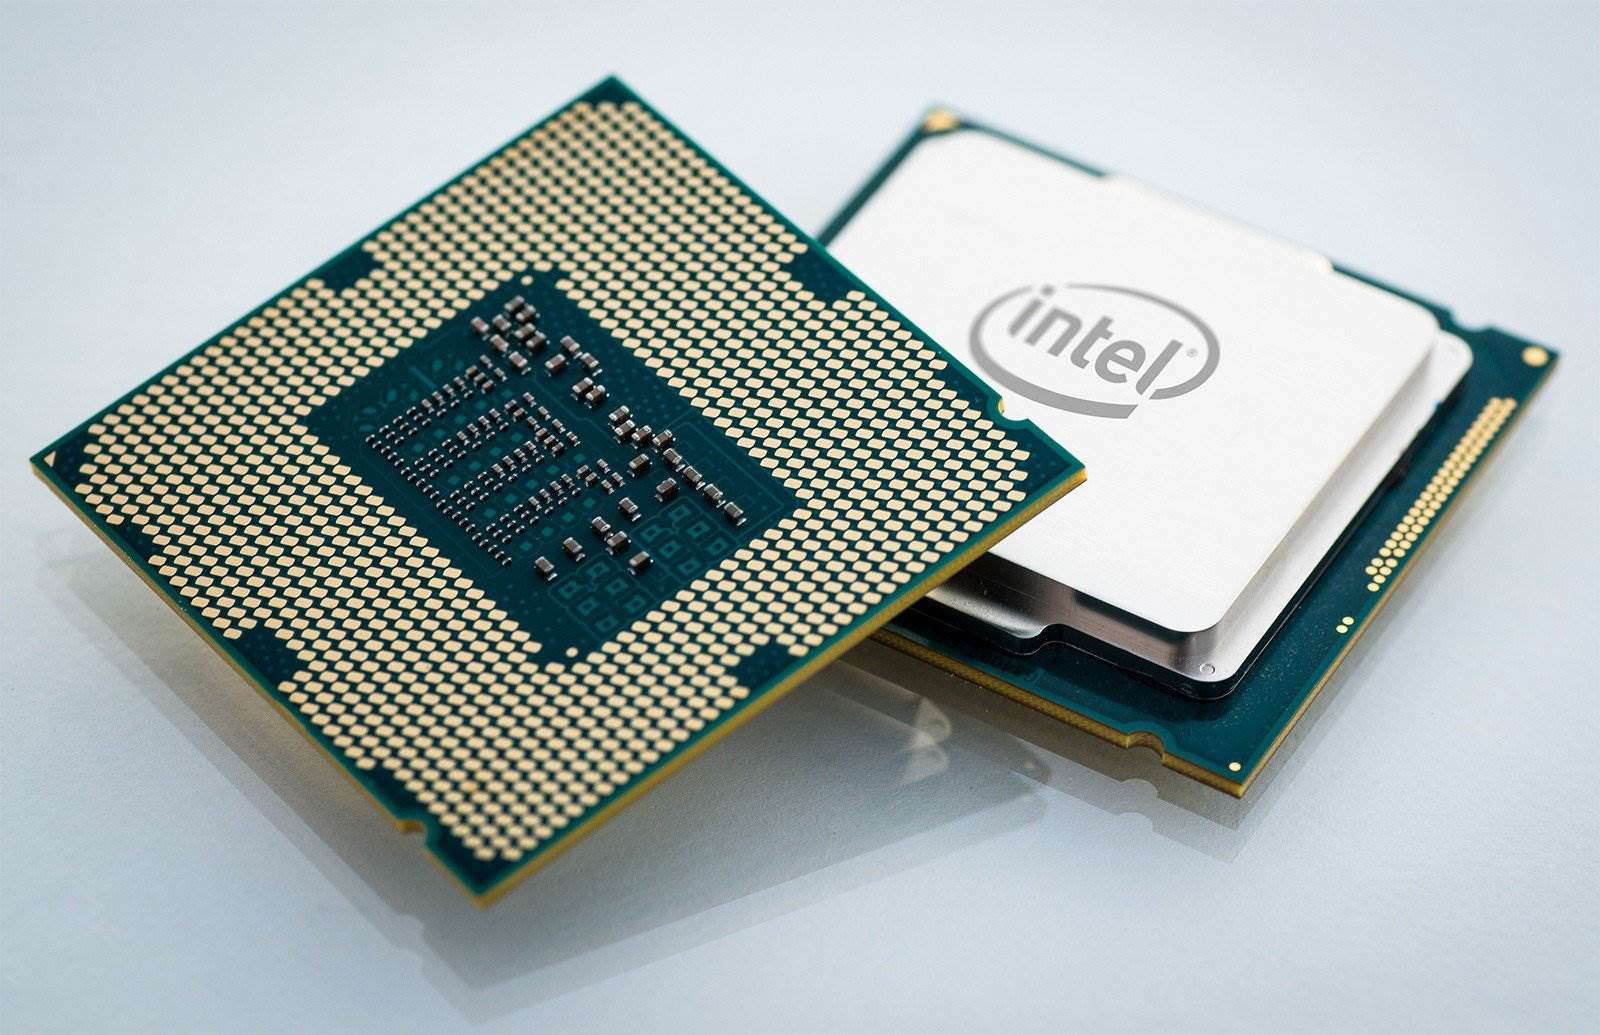 Intel's new Extreme CPU comes with 10 physical cores.